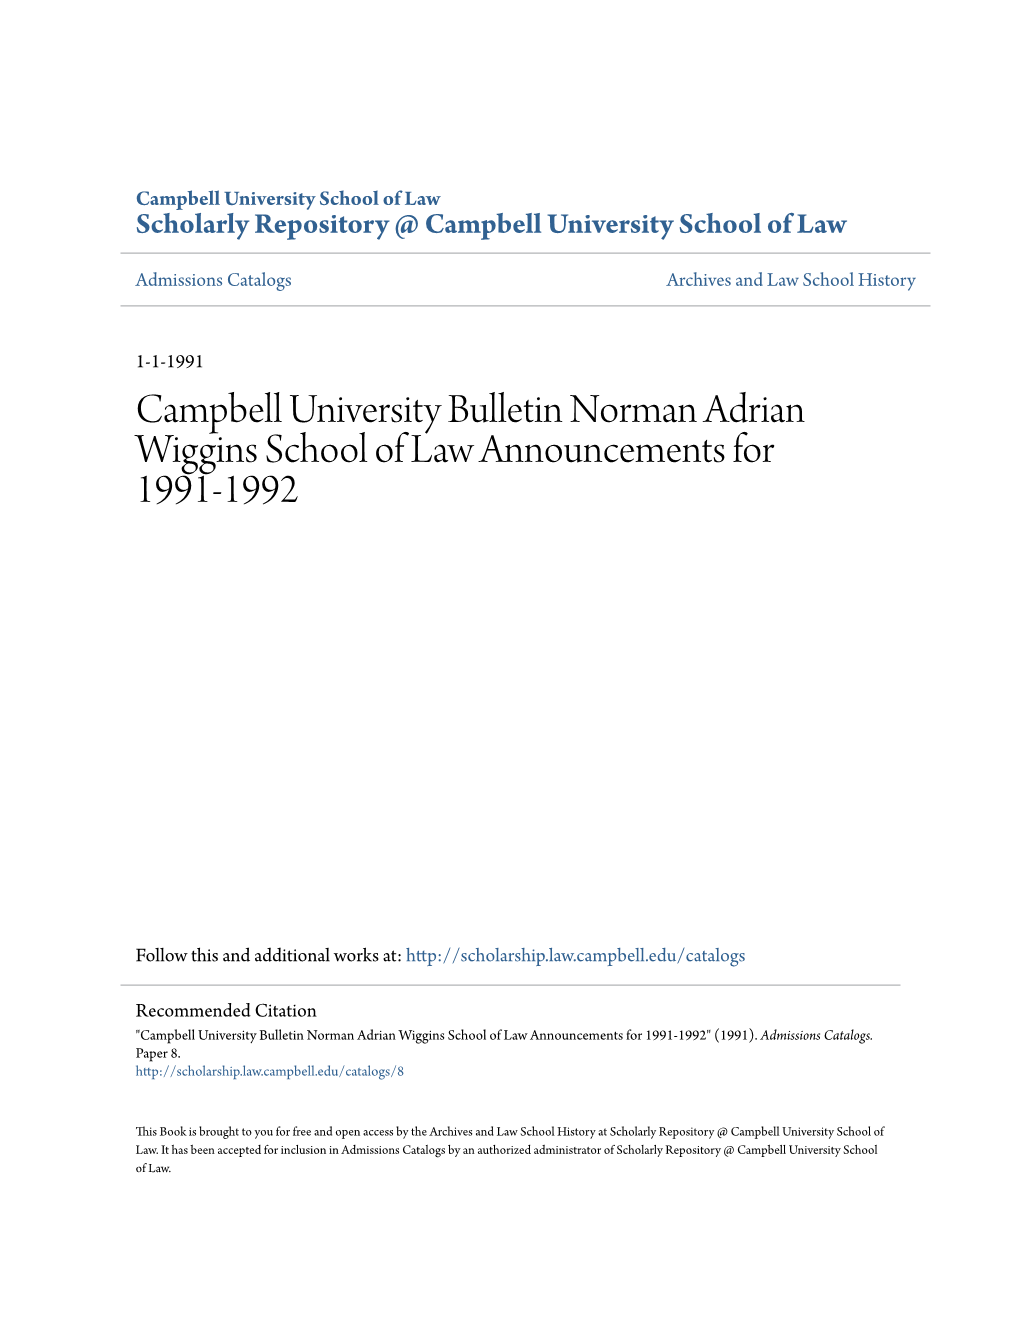 Campbell University Bulletin Norman Adrian Wiggins School of Law Announcements for 1991-1992